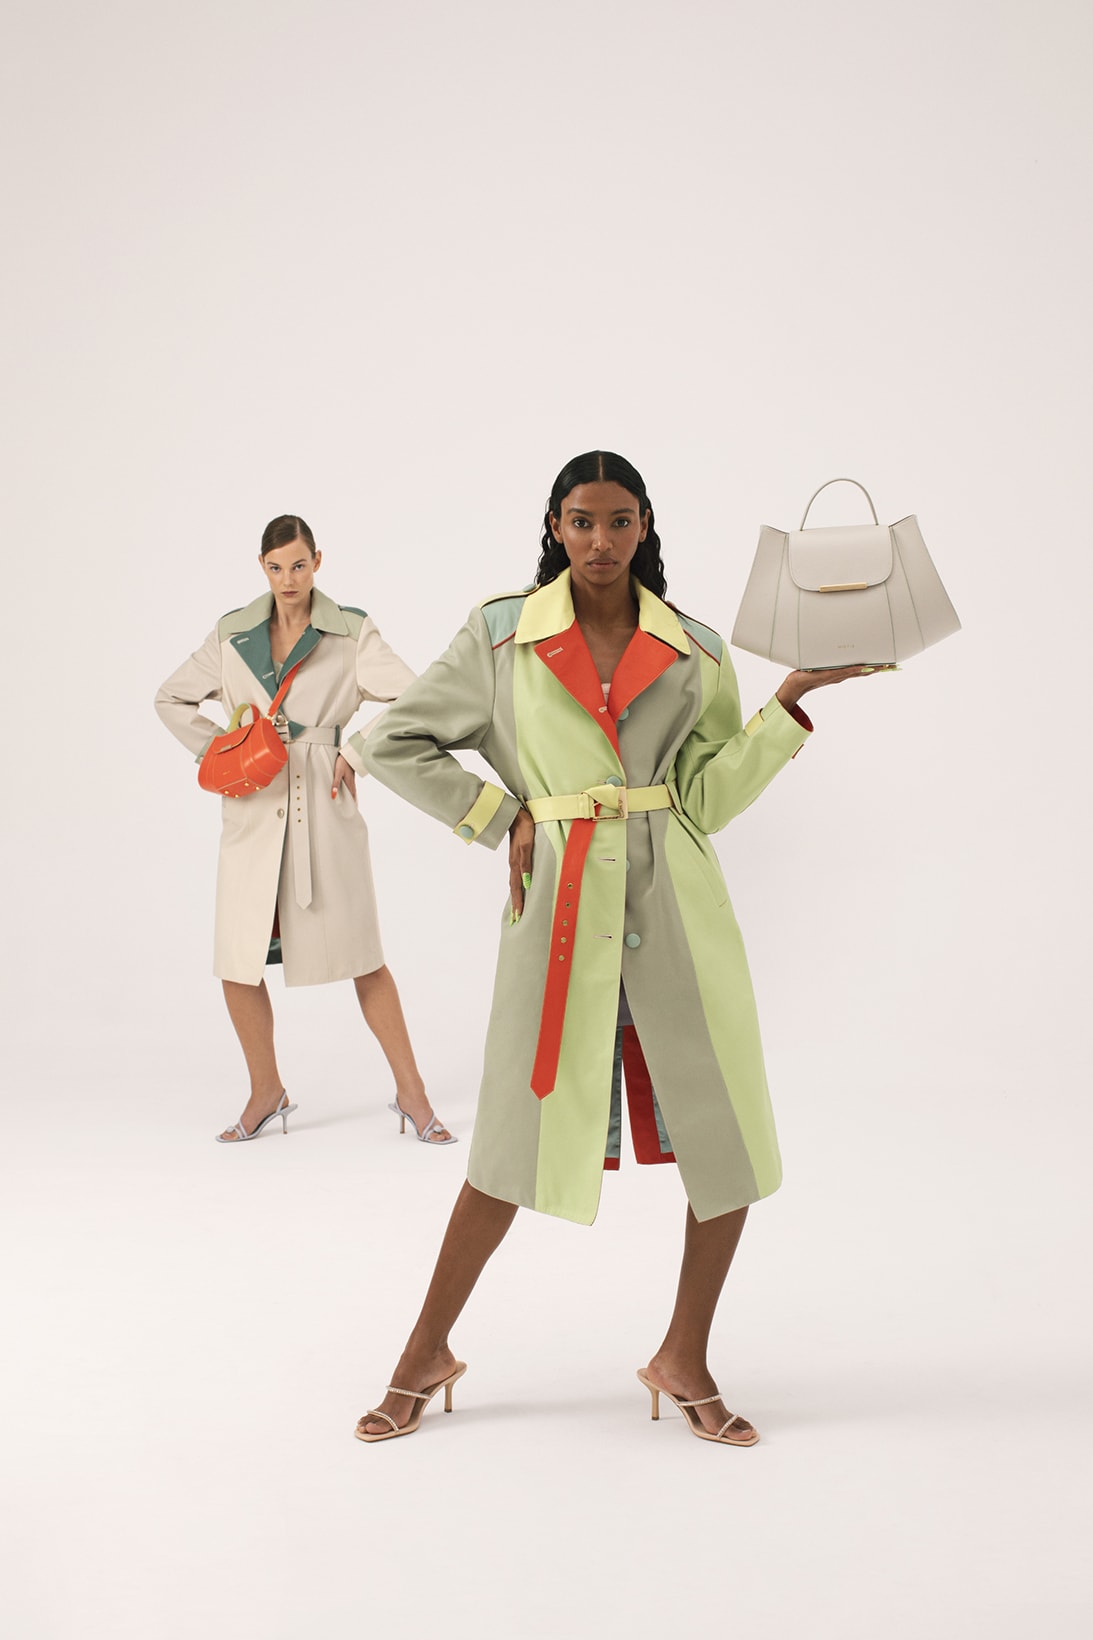 MIETIS Ready-to-Wear Leather Handbags Collection Trench Coat Heels